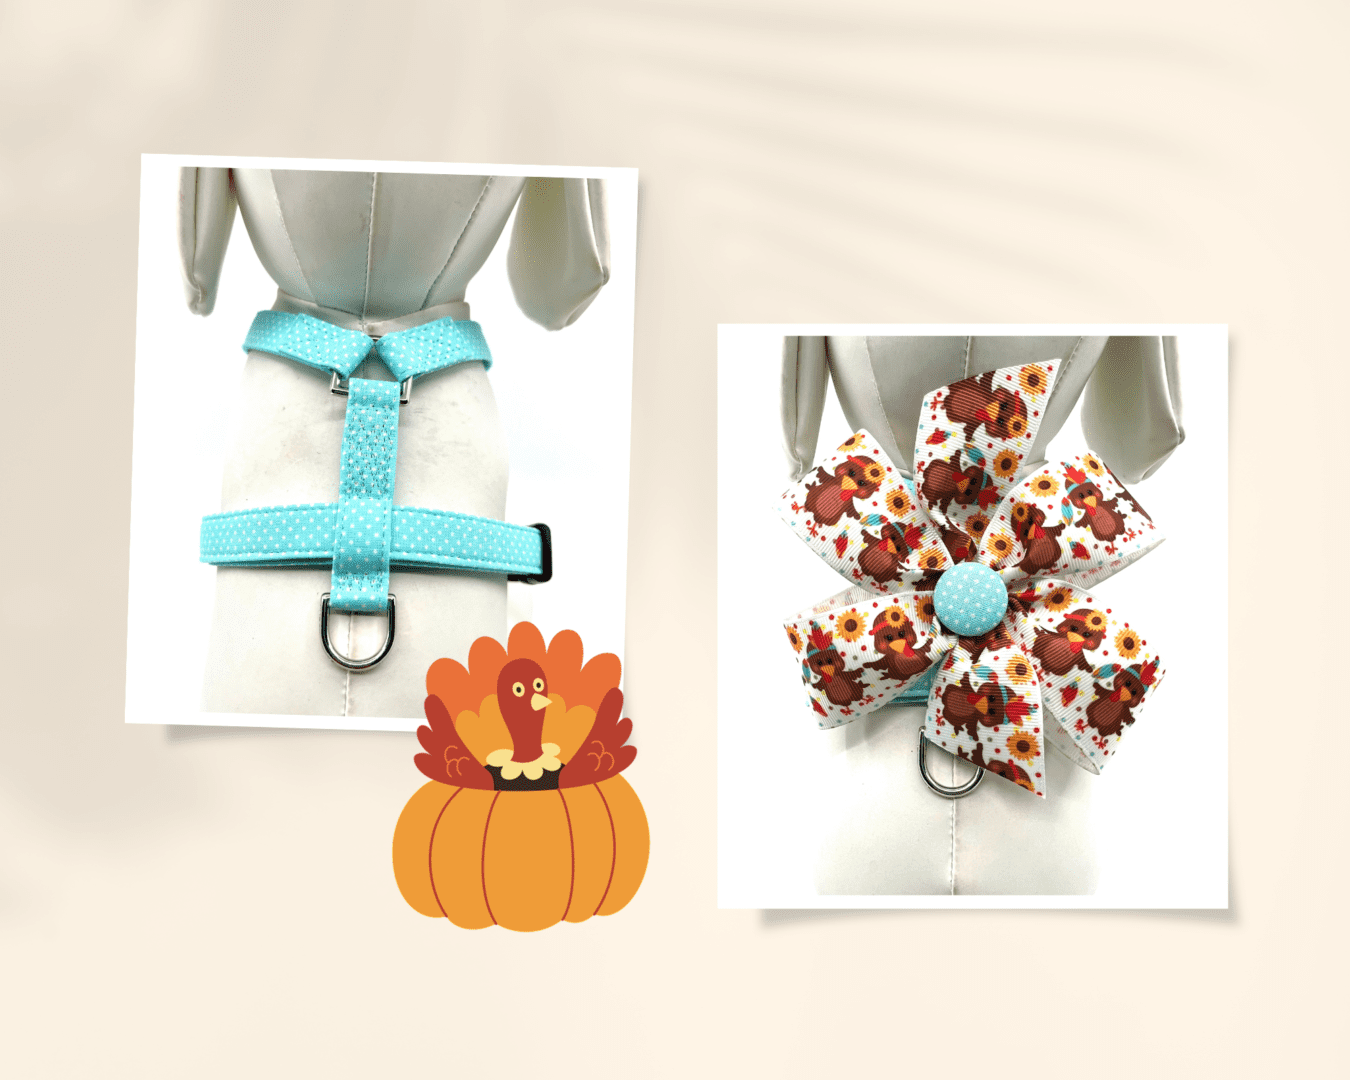 A dog harness and bow tie next to a pumpkin.